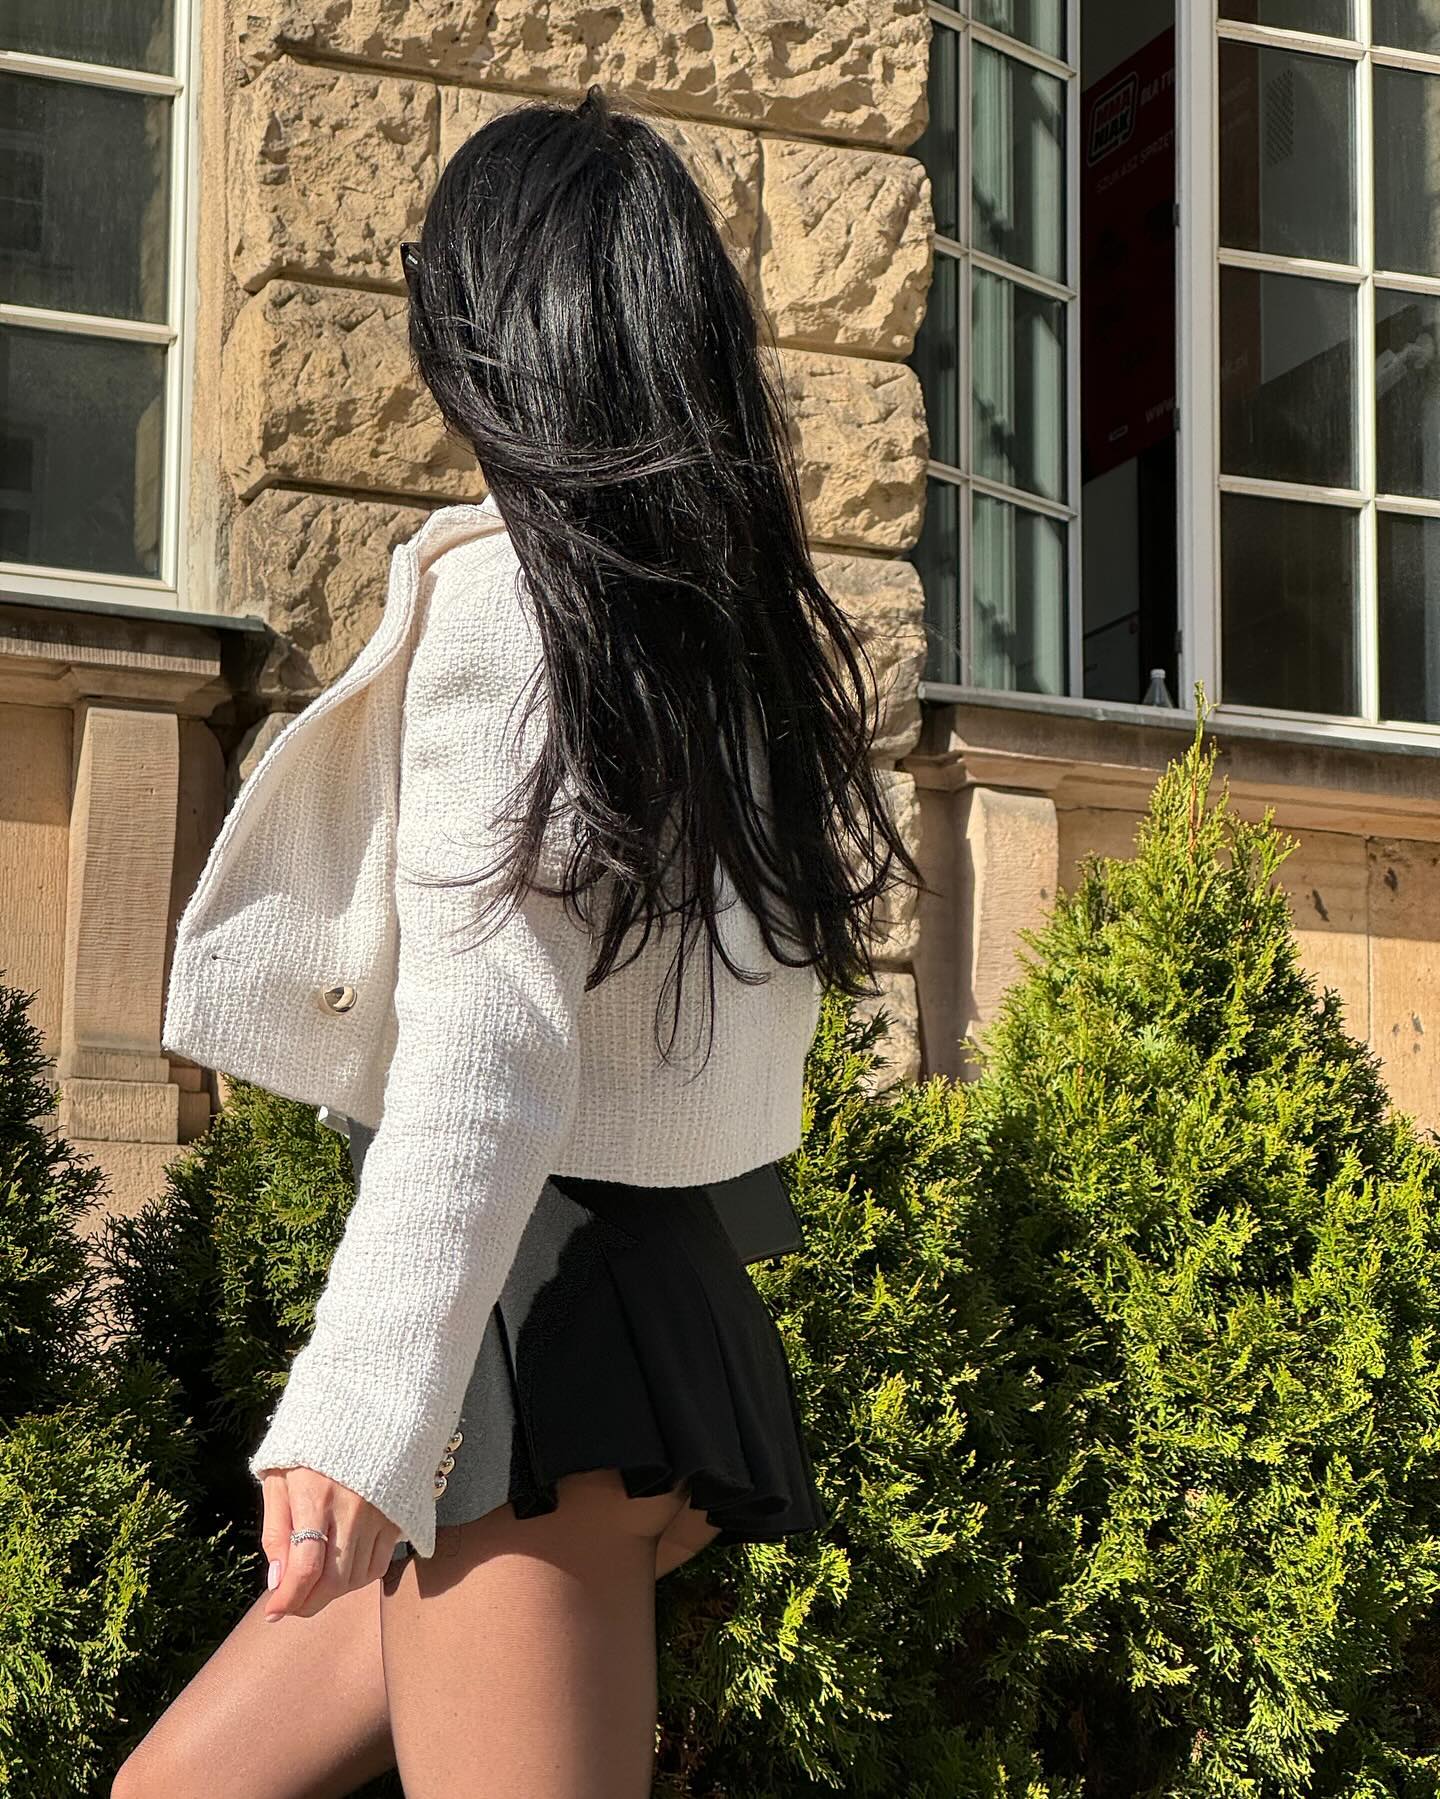 It’s a little unsafe to walk around in such a skirt 🤭